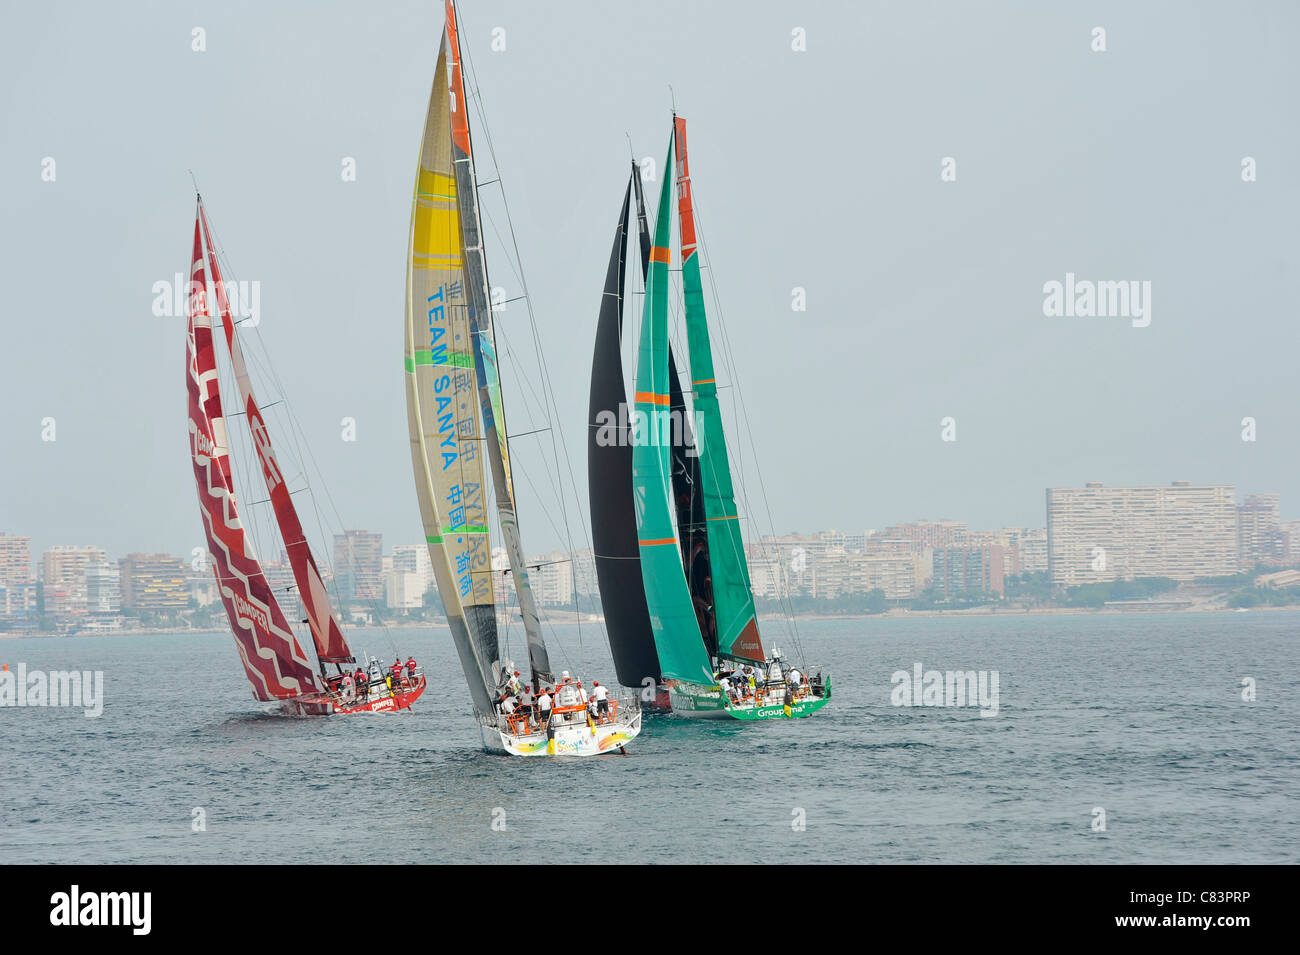 Teams Camper,Sanya,Groupama and Puma (from left) during trial leg of Volvo  Ocean Race in Alicante Bay, Spain Stock Photo - Alamy